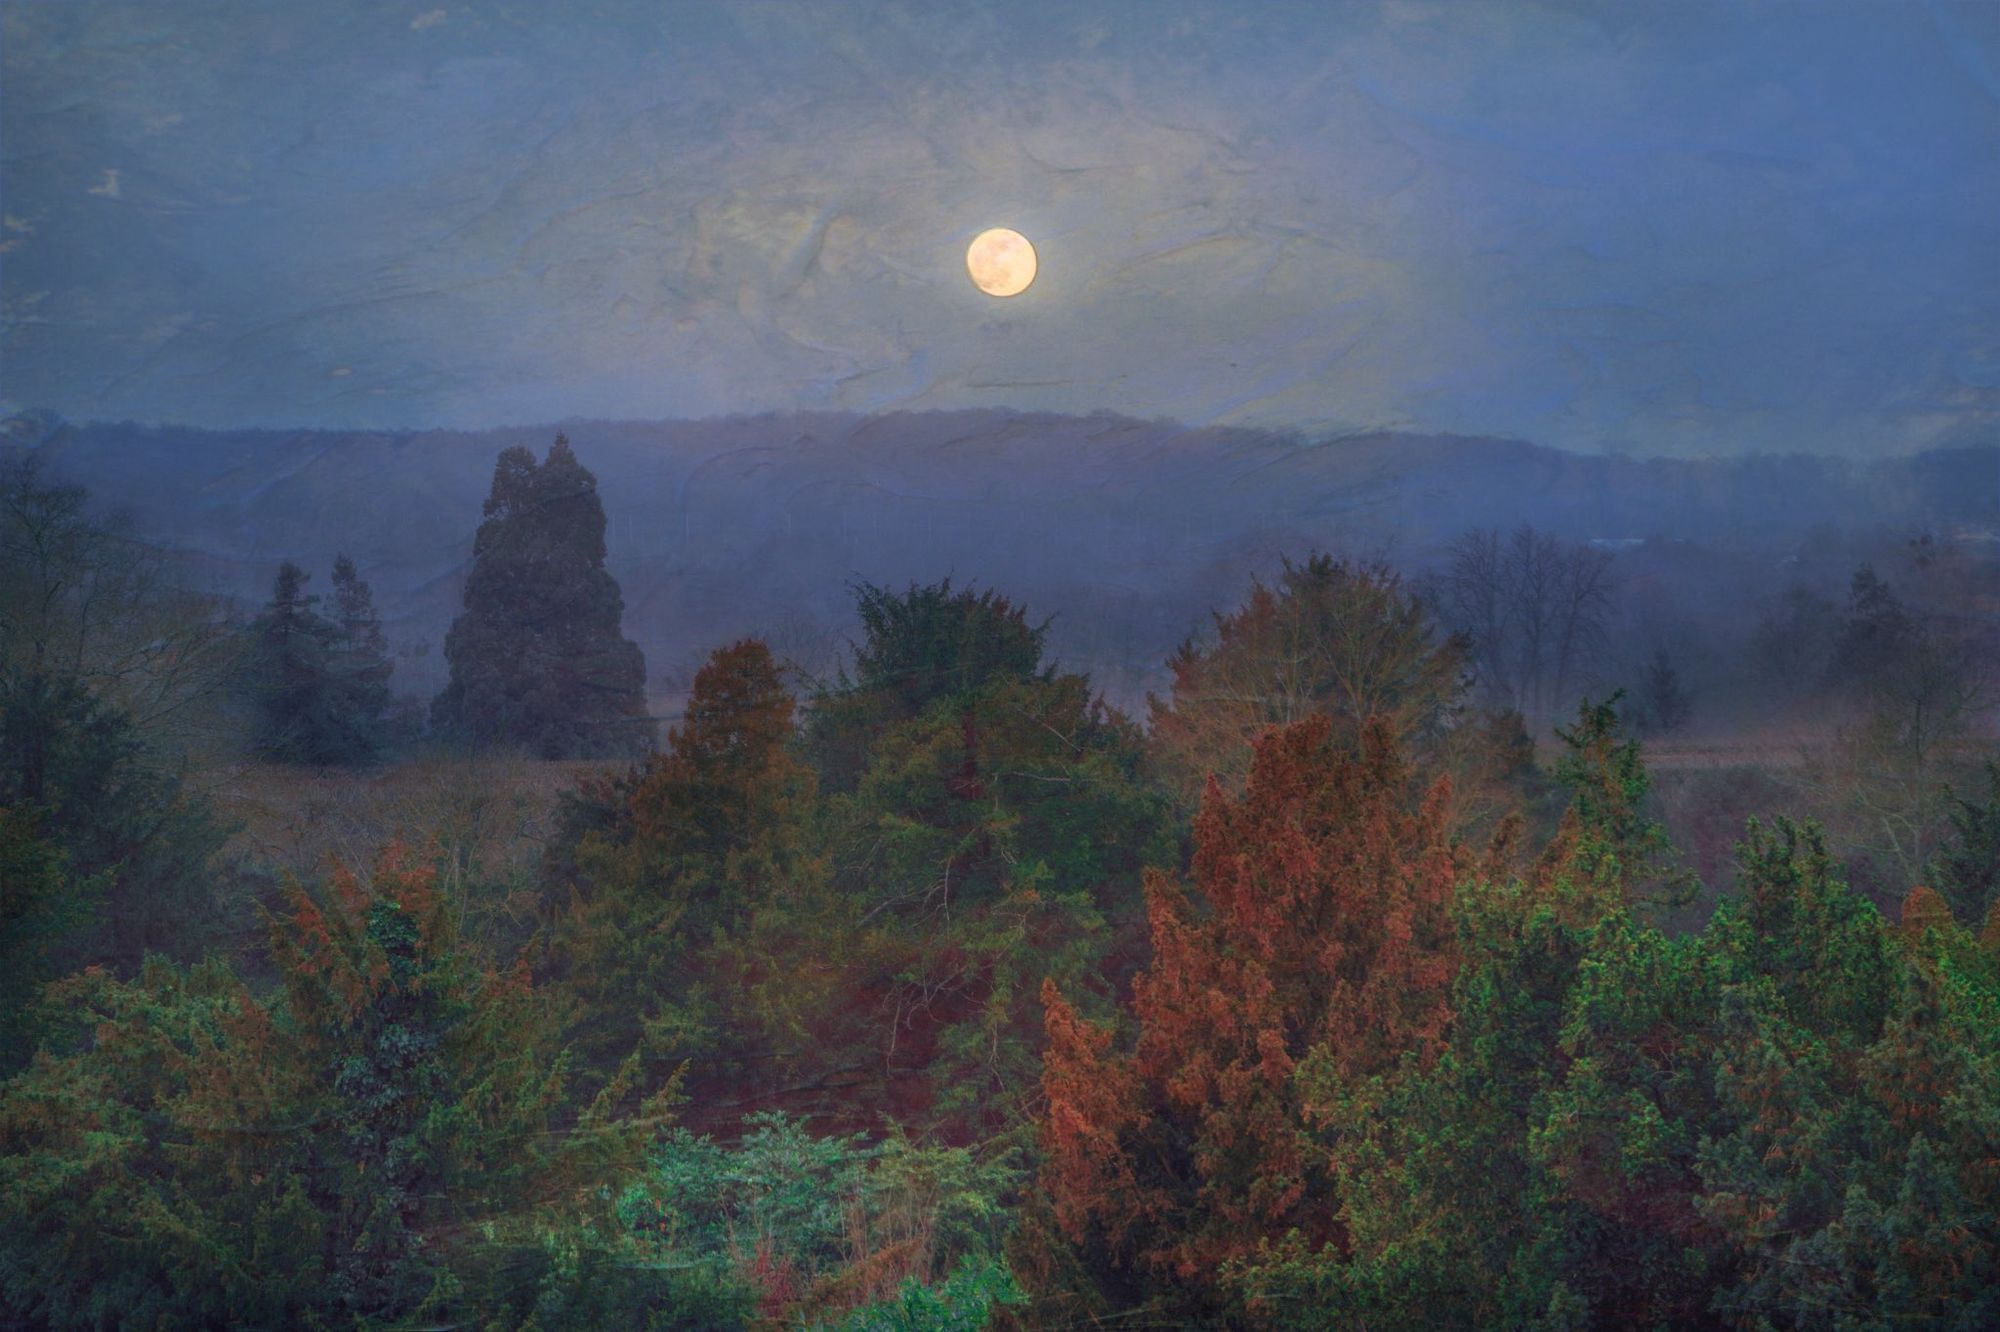 moody image of the moon over trees, with fall color, against a distant blue mountain… it's clearly not a single photograph and has a texture like an oil painting